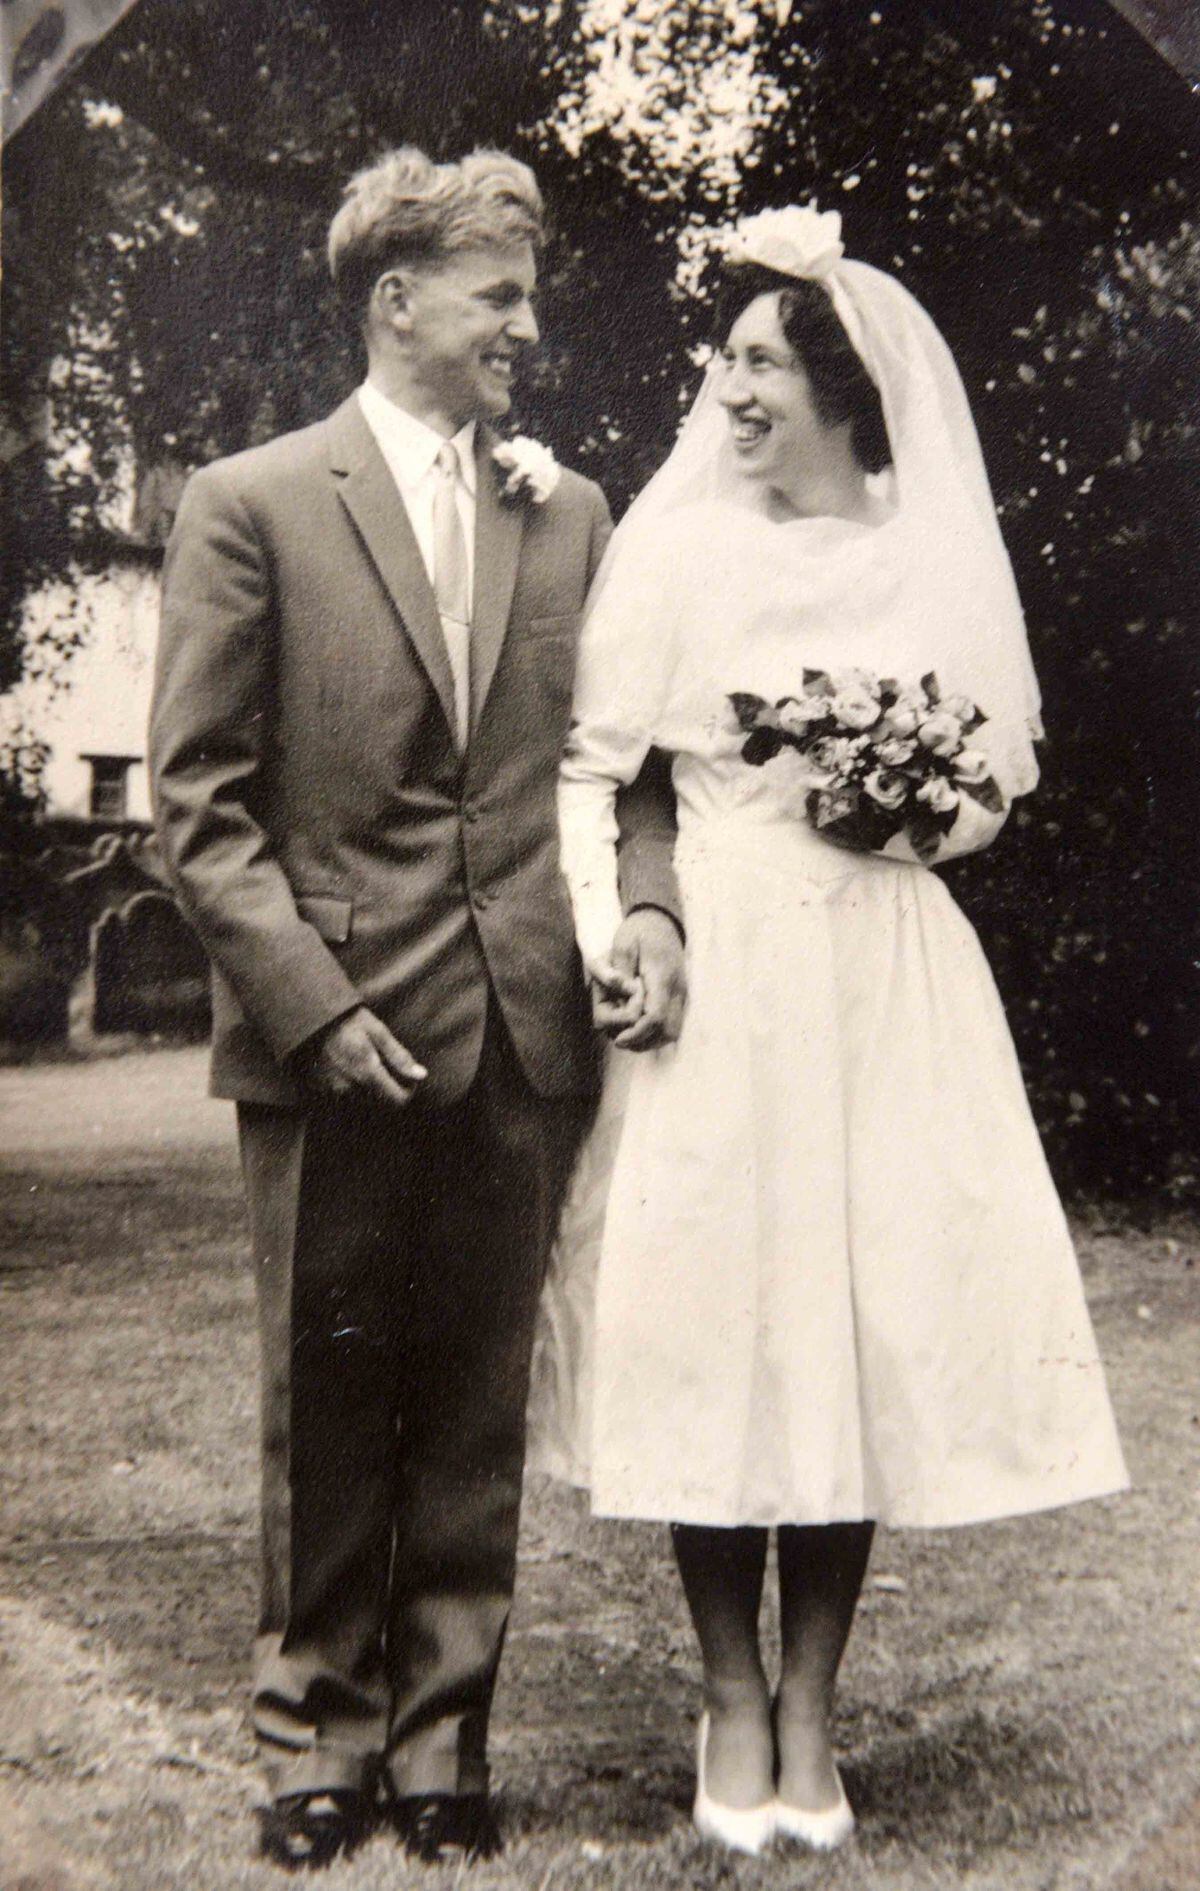 The couple were married at St Marys Church in Market Drayton in September, 1962